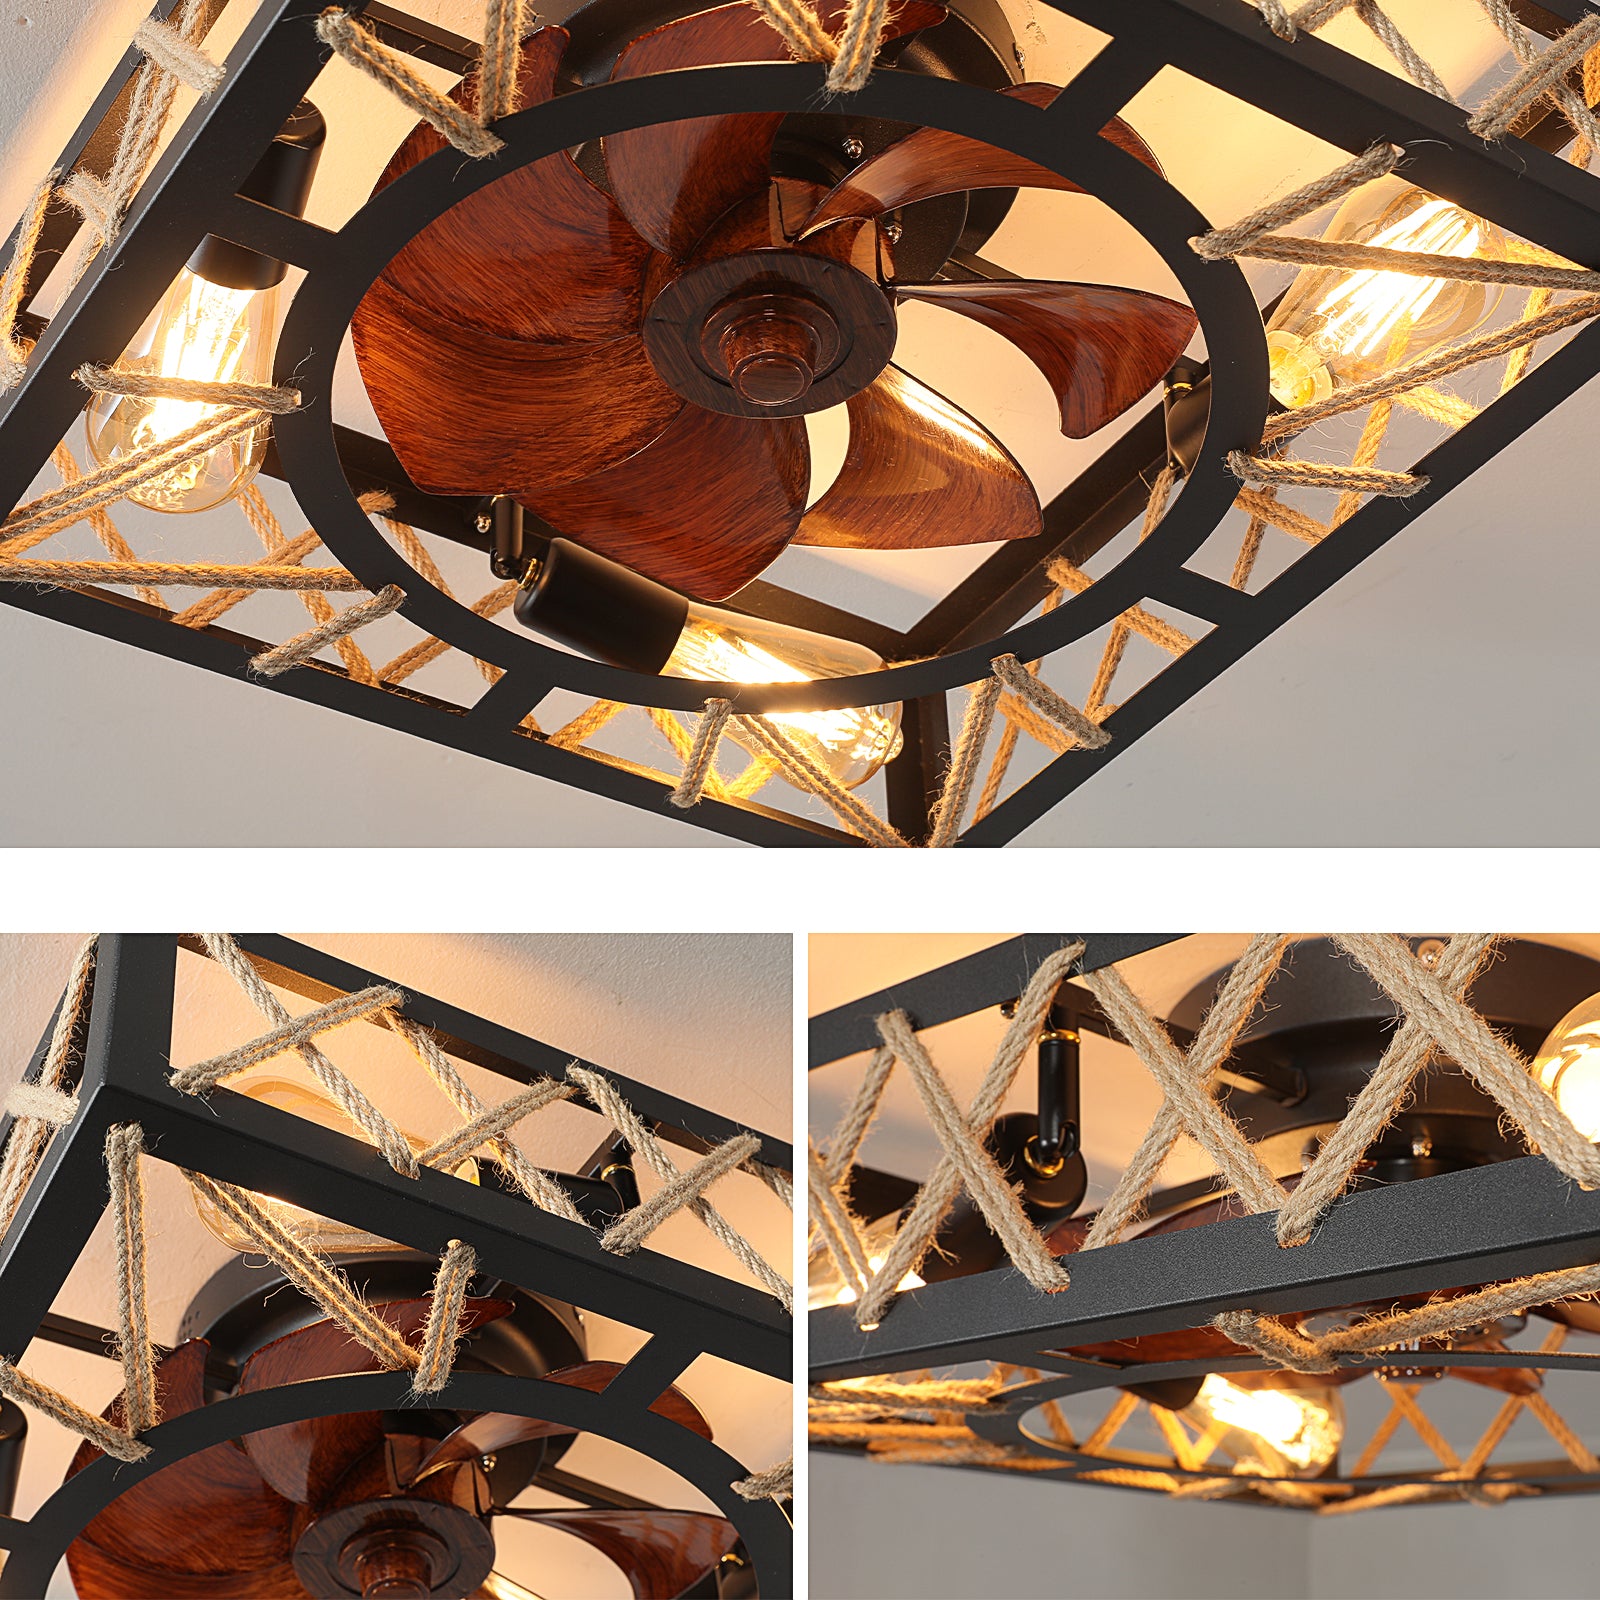 Modern Square Flush Mount Caged Ceiling Fan With Lights